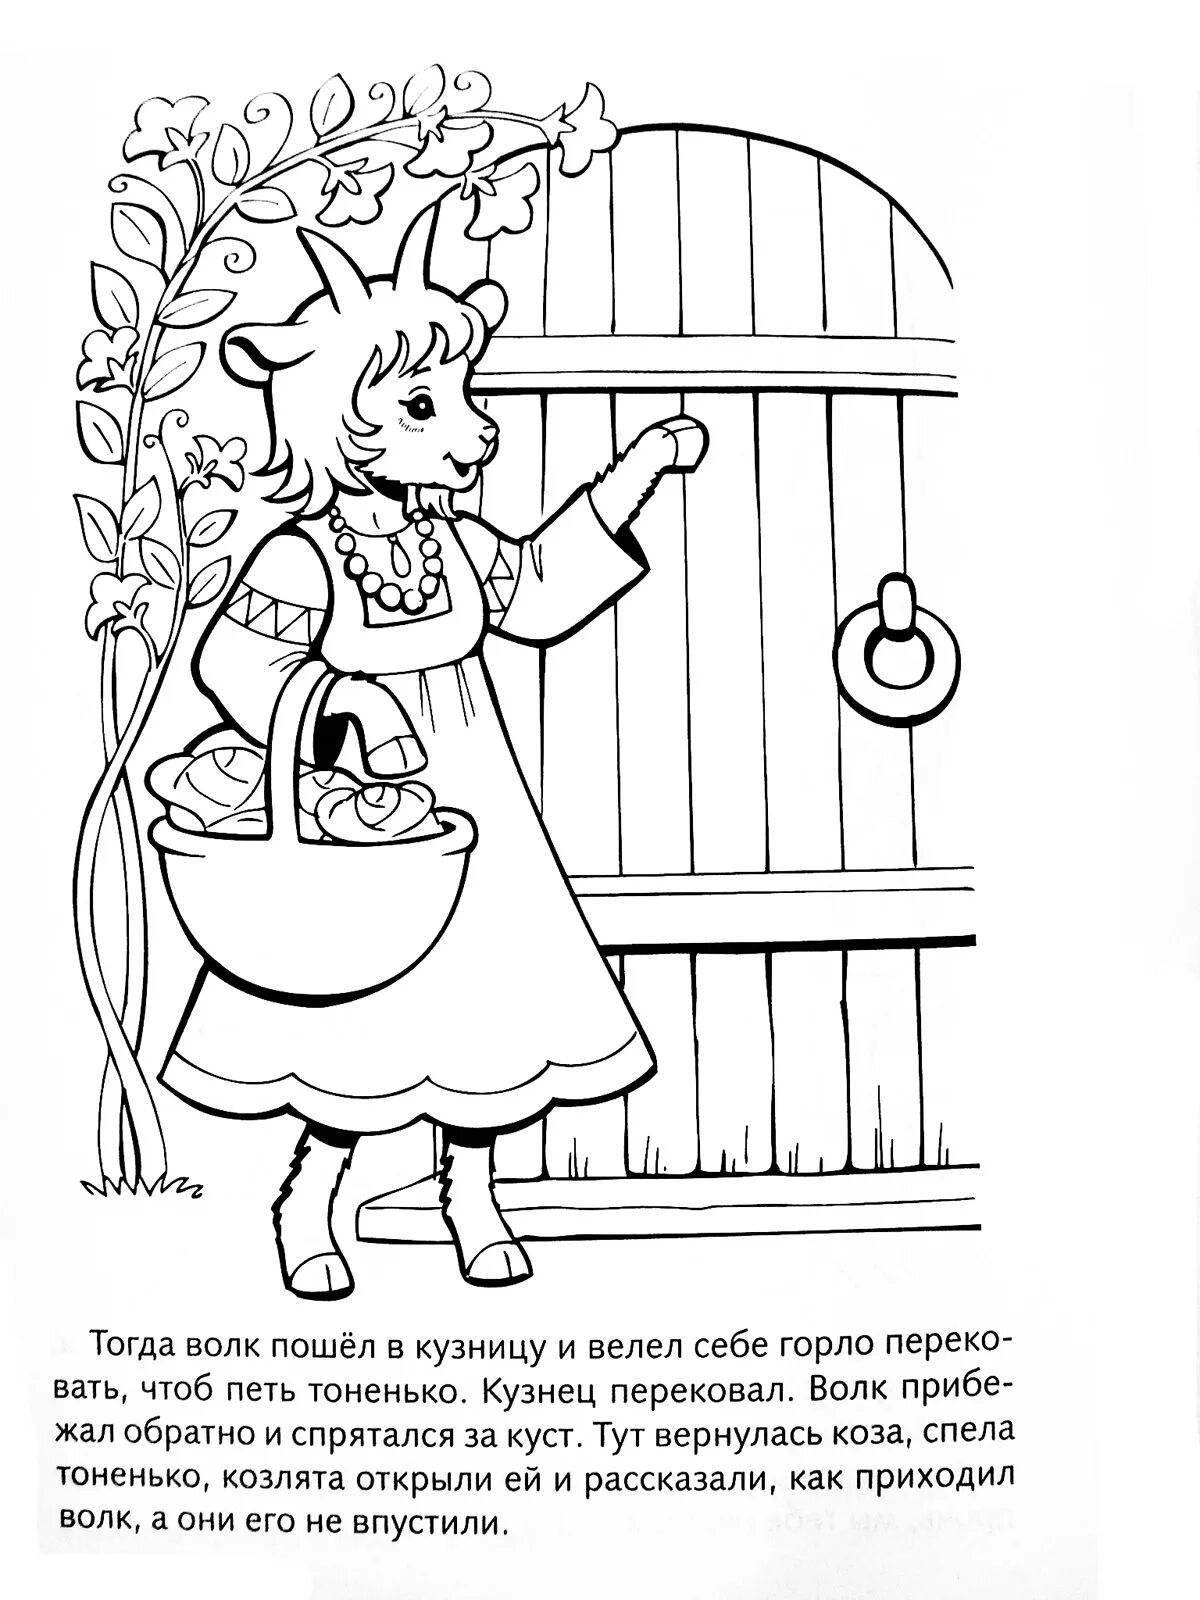 Adorable wolf and seven kids coloring book